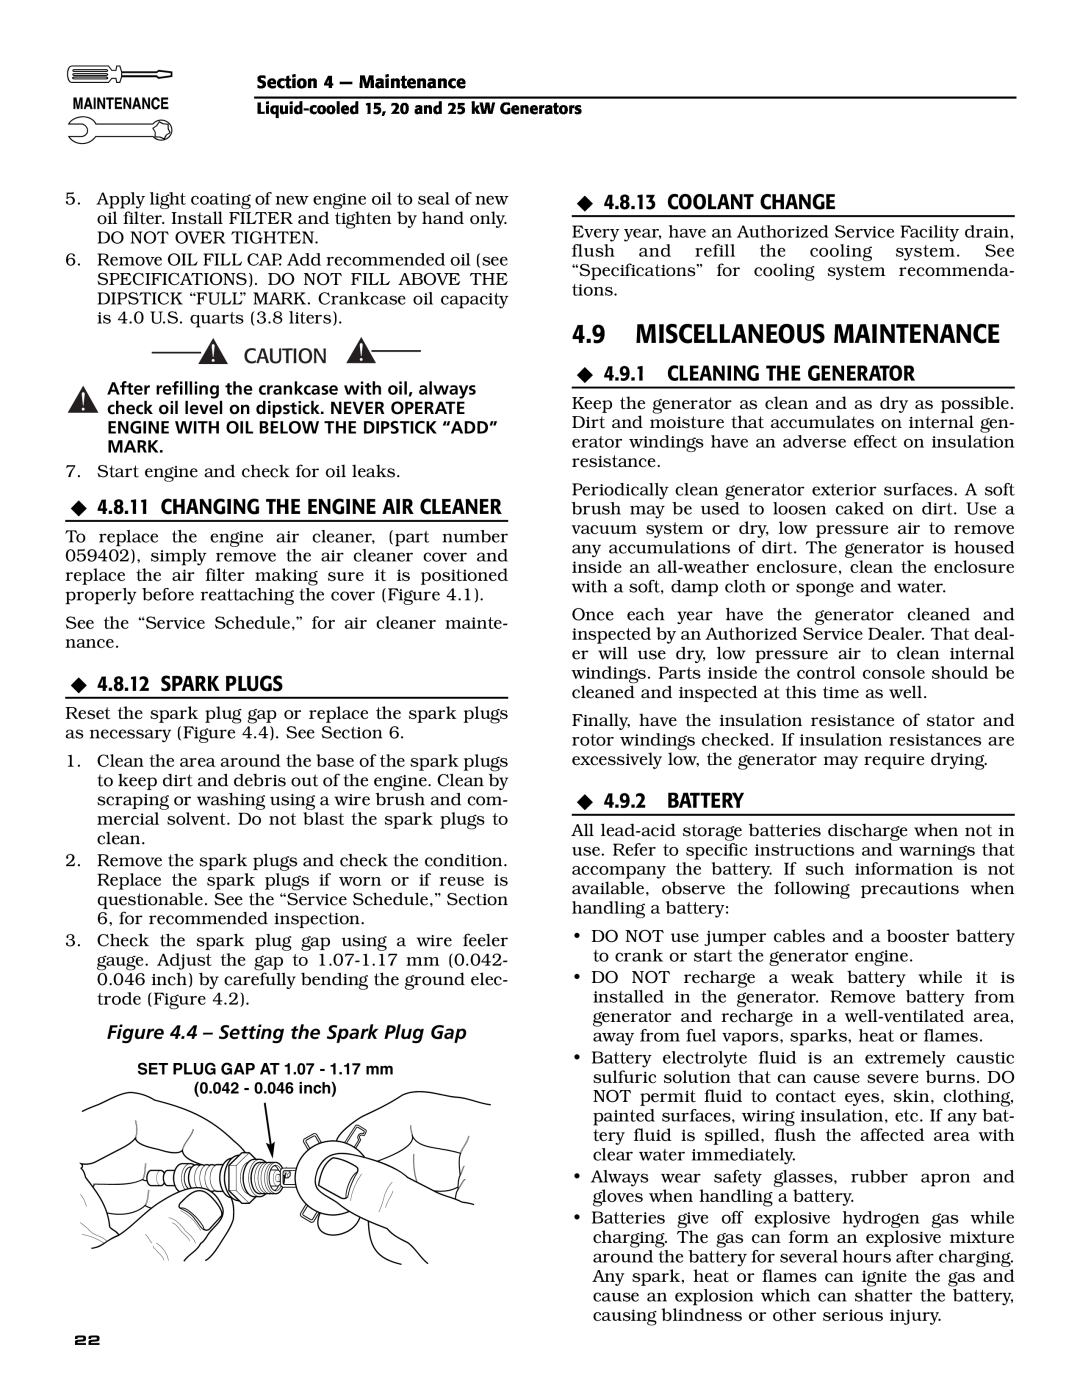 Generac 005028-0 owner manual Miscellaneous Maintenance, ‹ 4.8.11 CHANGING THE ENGINE AIR CLEANER, ‹ 4.8.12 SPARK PLUGS 